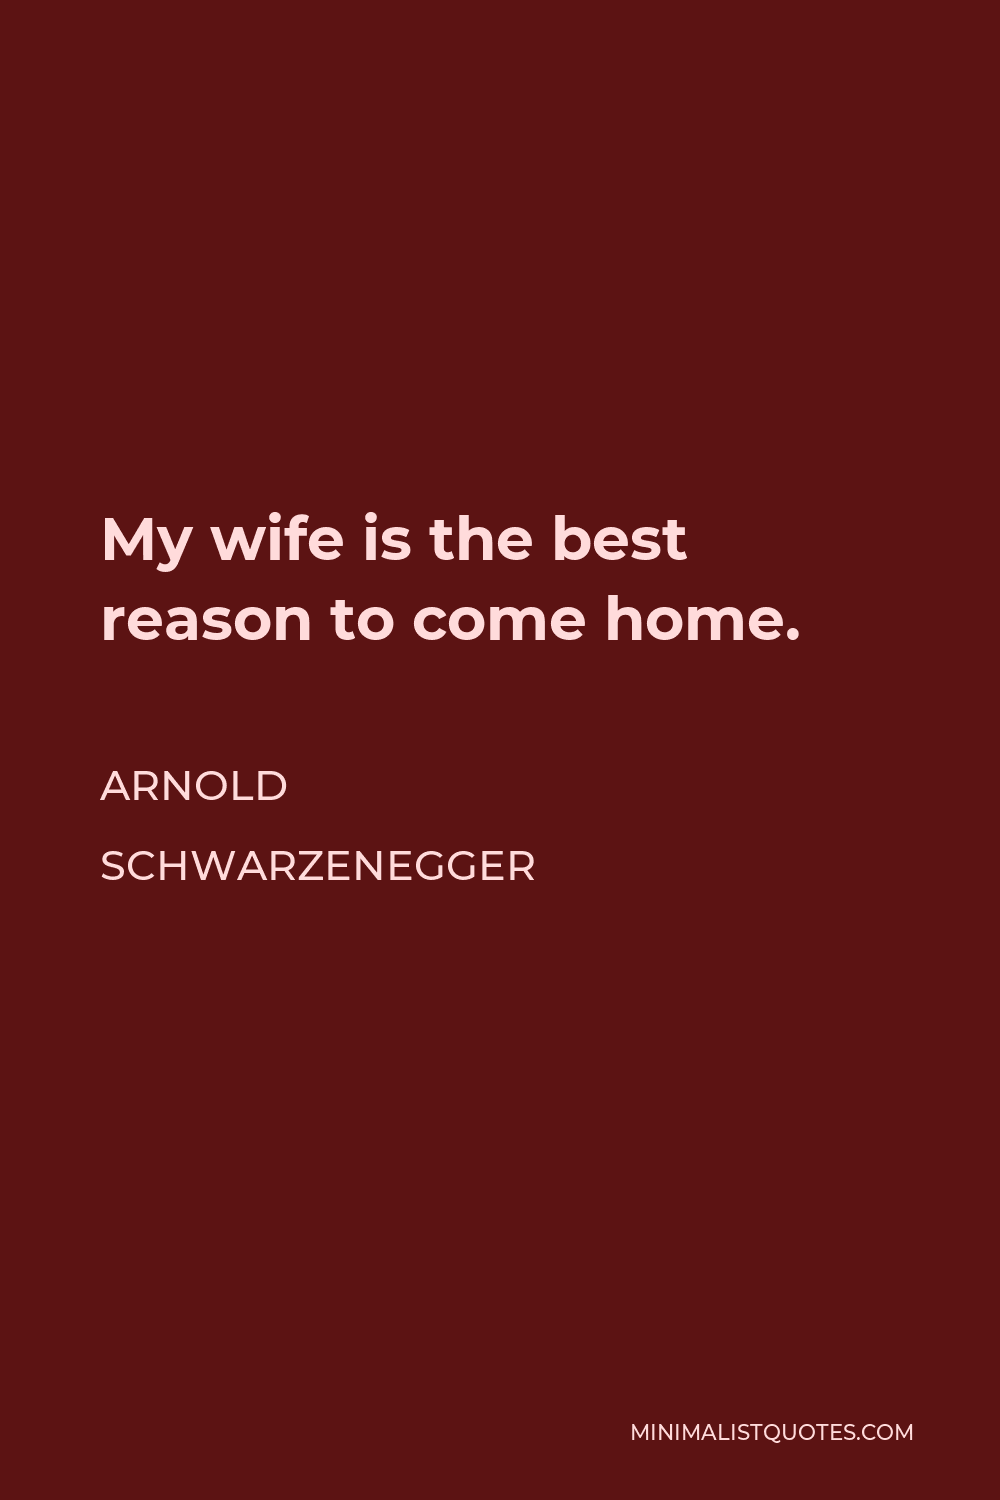 Arnold Schwarzenegger Quote - My wife is the best reason to come home.